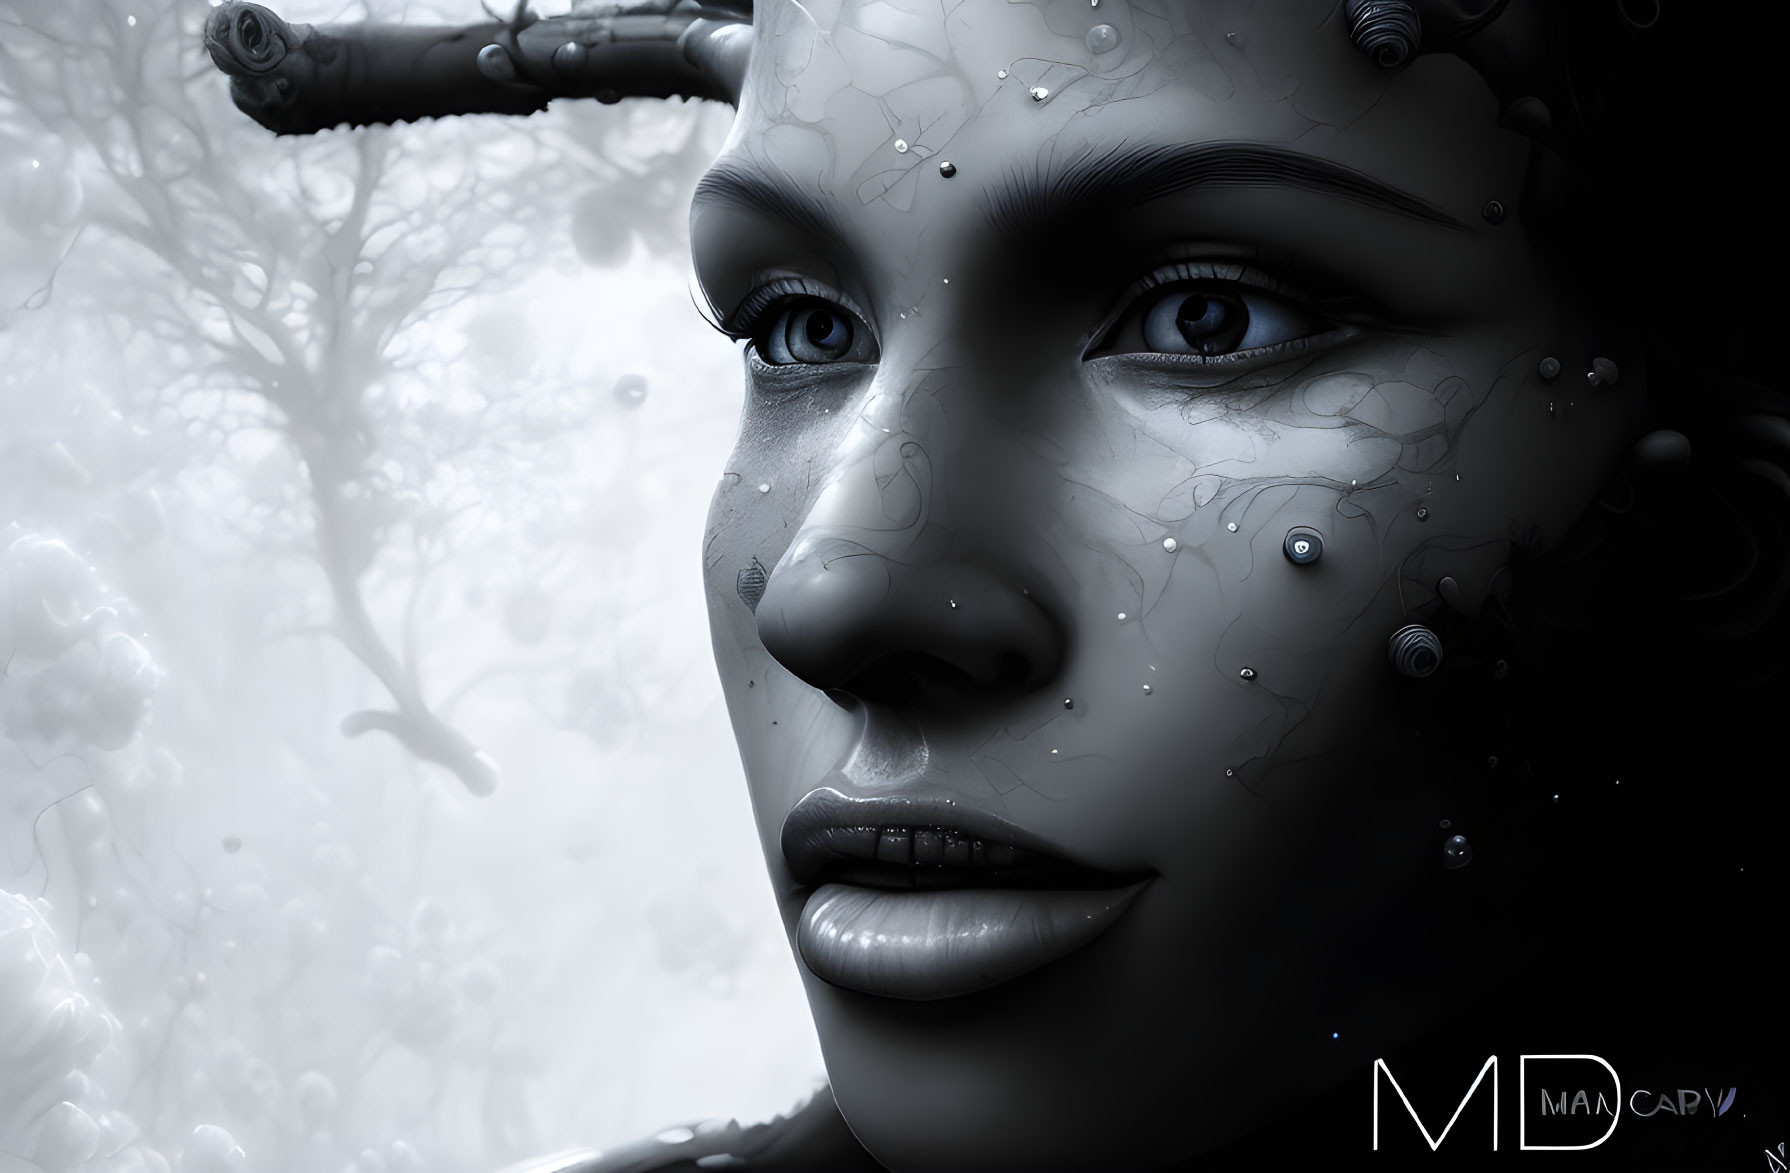 Monochromatic digital artwork of female face with cybernetic enhancements